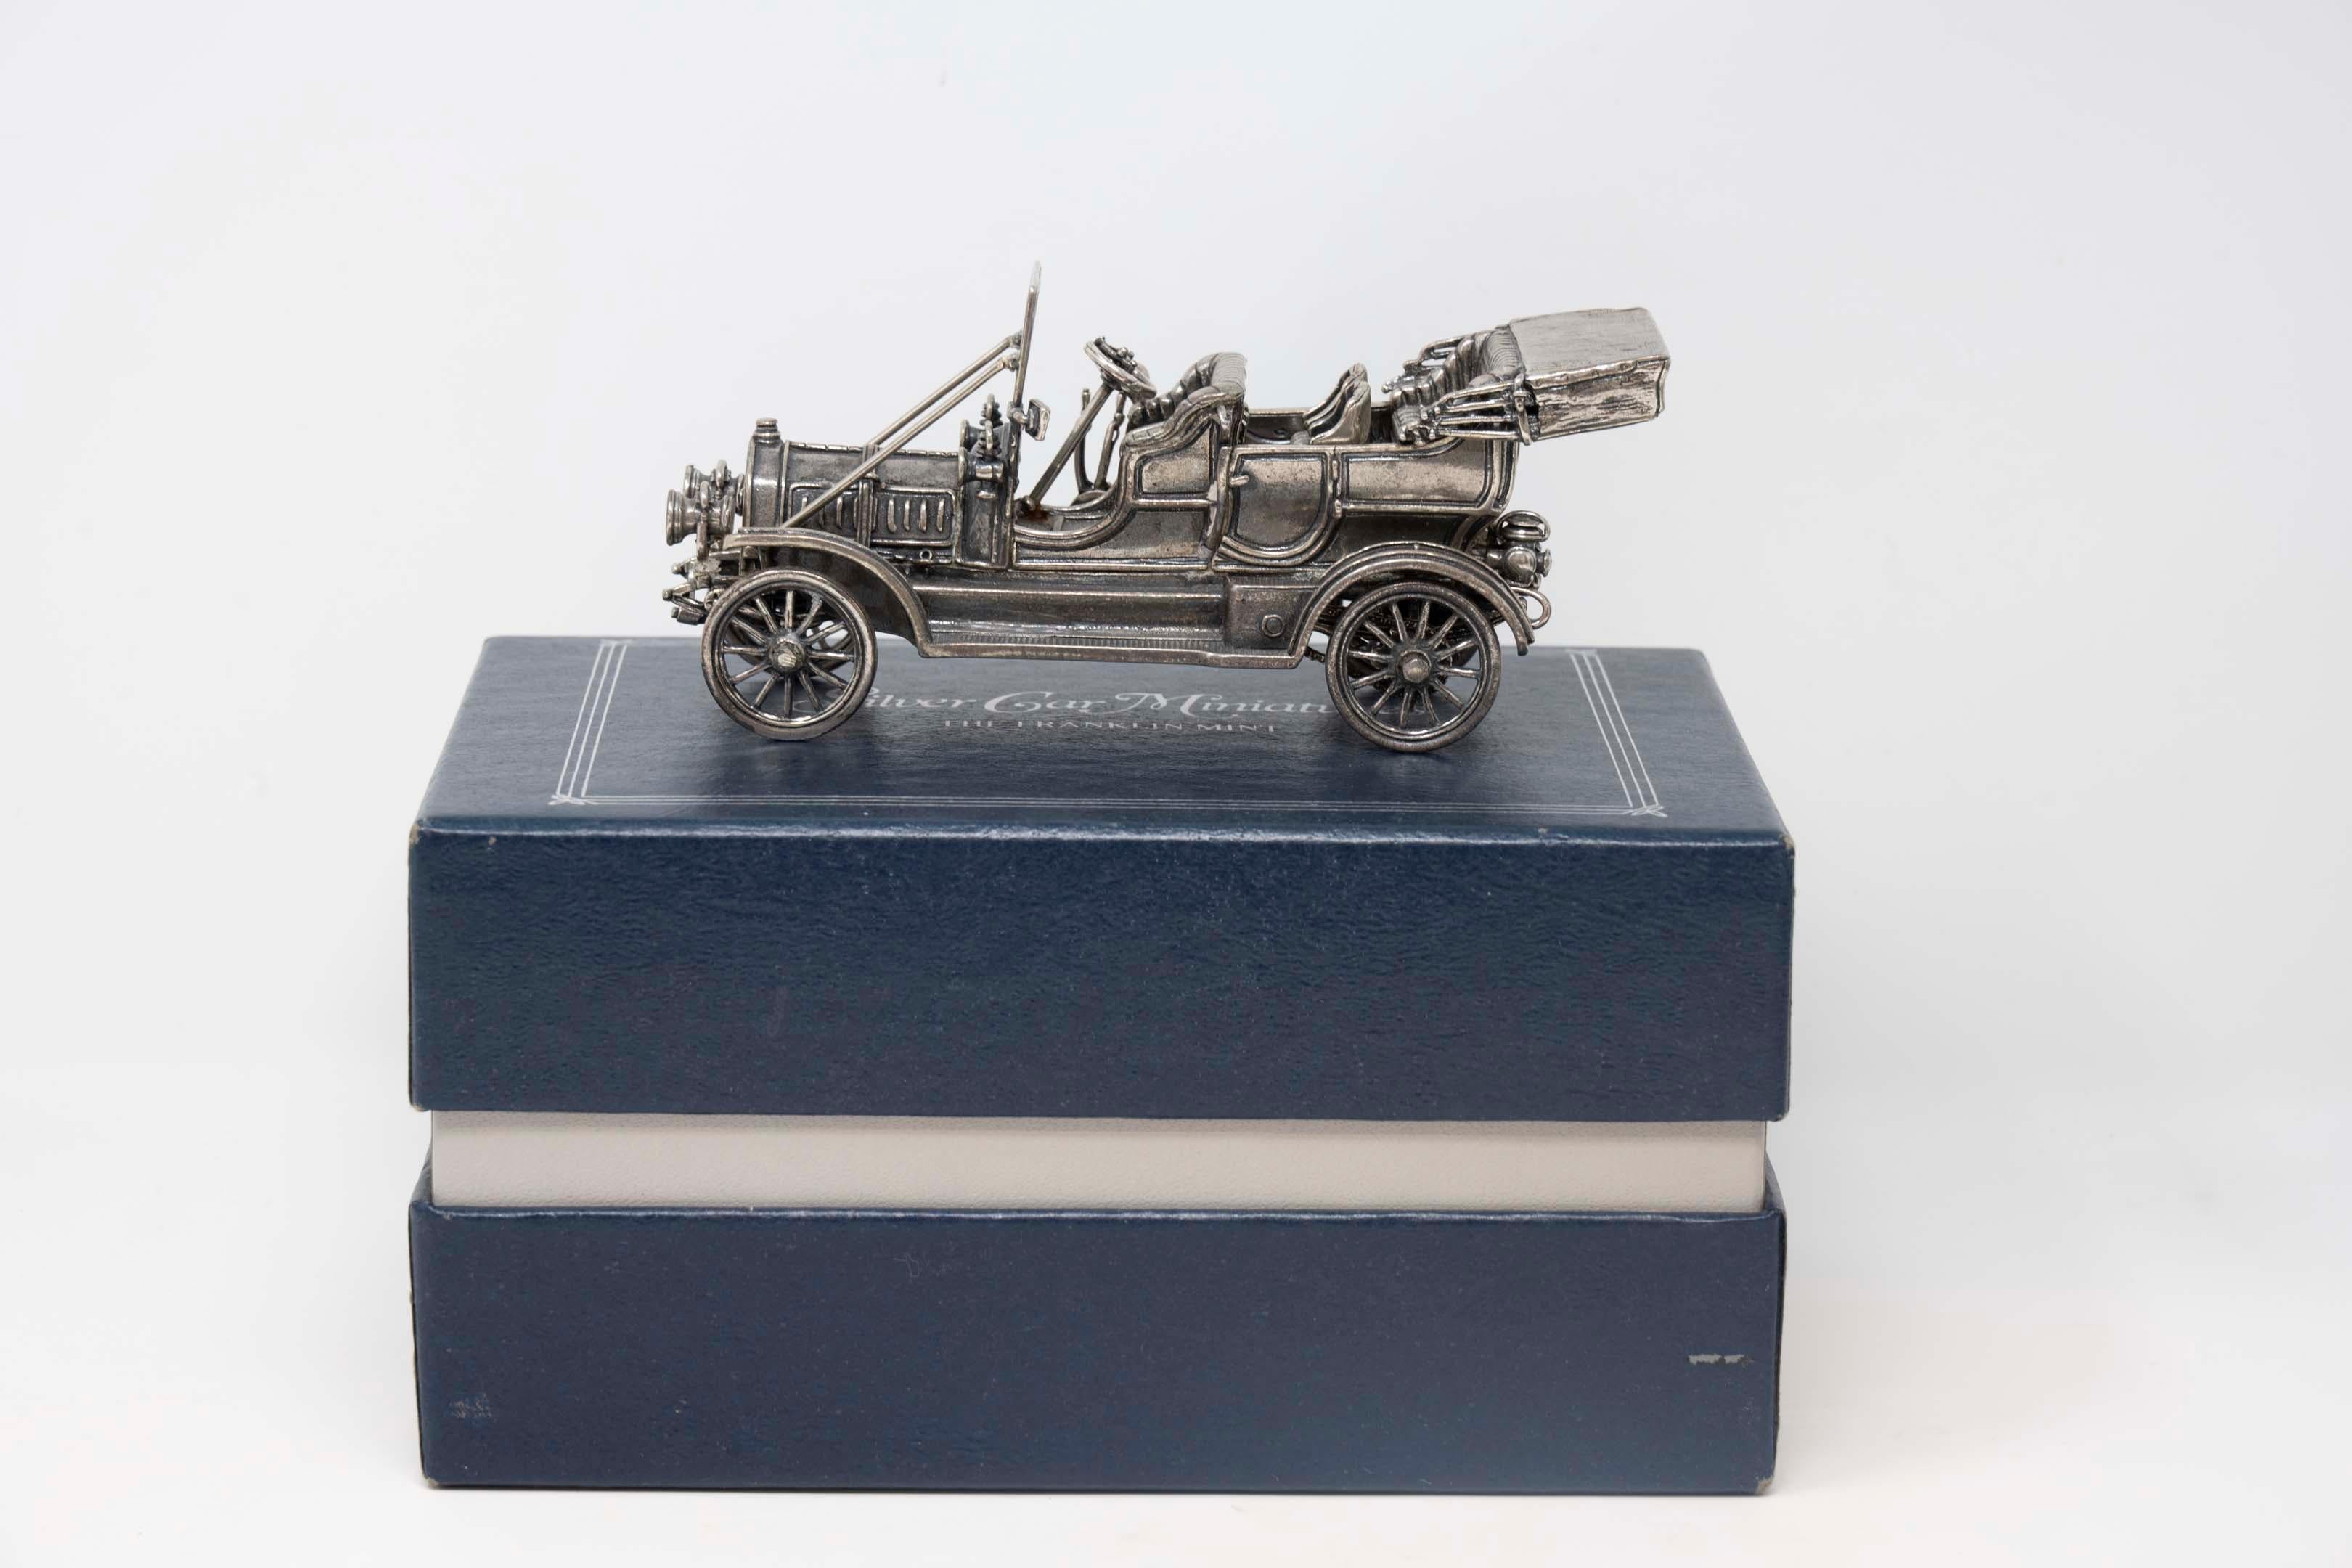 Franklin Mint 1911 Delaunay-Belleville sterling silver miniature car with box. Measures 4 3/4 inches long x 2 1/4 inches tall 1 1/2 inches wide. Made in 1970-80, hallmarked. Weighs 229.3 grams, in good condition.
